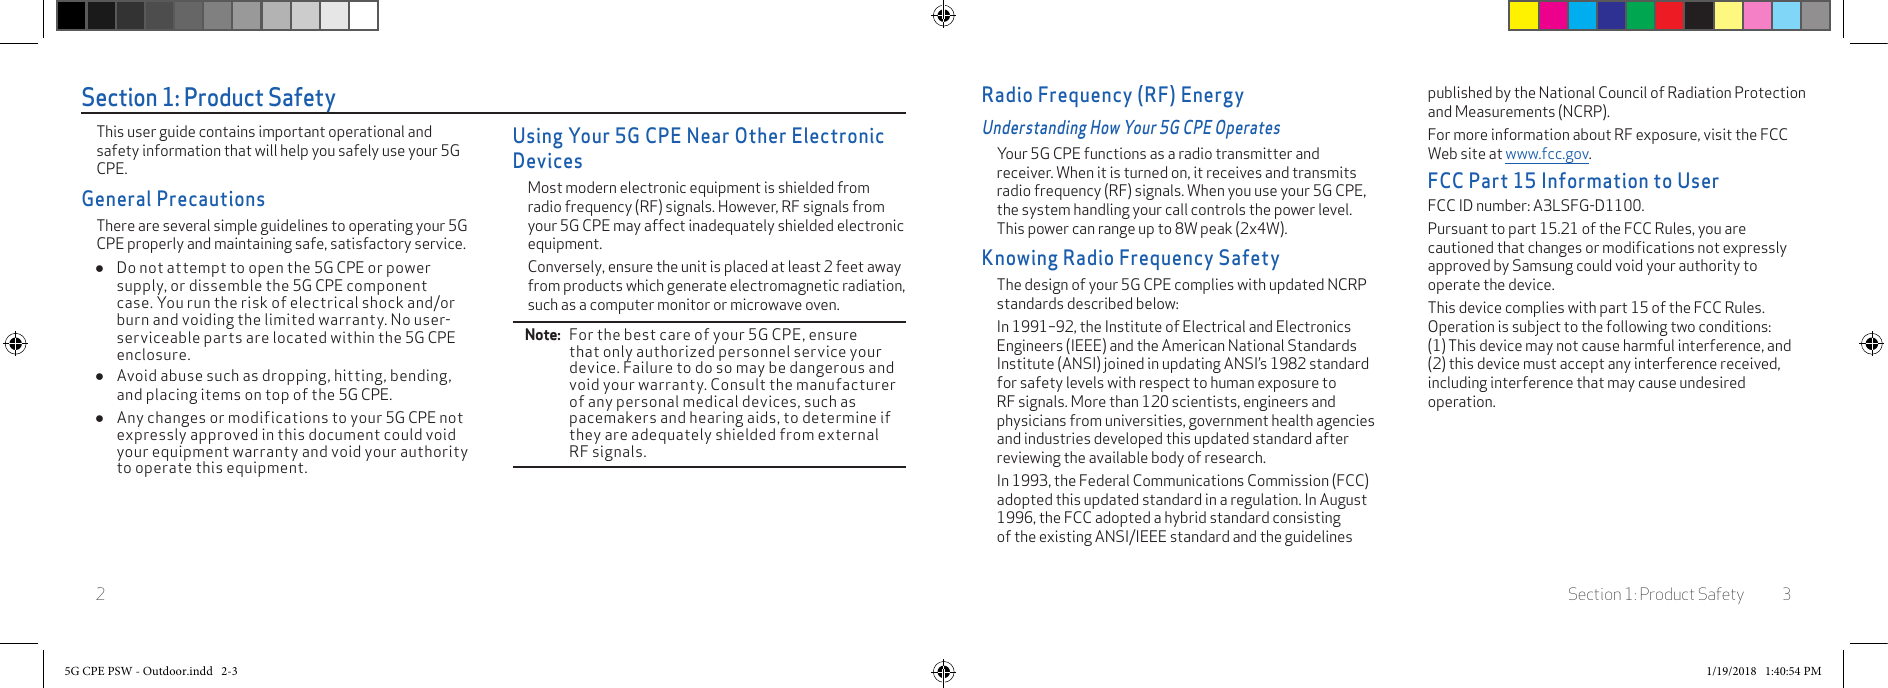 Section 1: Product Safety 32Section 1: Product SafetyThis user guide contains important operational and safety information that will help you safely use your 5G CPE.General PrecautionsThere are several simple guidelines to operating your 5G CPE properly and maintaining safe, satisfactory service. ●Do not attempt to open the 5G CPE or power supply, or dissemble the 5G CPE component case. You run the risk of electrical shock and/or burn and voiding the limited warranty. No user-serviceable parts are located within the 5G CPE enclosure. ●Avoid abuse such as dropping, hitting, bending, and placing items on top of the 5G CPE. ●Any changes or modifications to your 5G CPE not expressly approved in this document could void your equipment warranty and void your authority to operate this equipment.Using Your 5G CPE Near Other Electronic DevicesMost modern electronic equipment is shielded from radio frequency (RF) signals. However, RF signals from your 5G CPE may affect inadequately shielded electronic equipment.Conversely, ensure the unit is placed at least 2 feet away from products which generate electromagnetic radiation, such as a computer monitor or microwave oven.Note:   For the best care of your 5G CPE, ensure that only authorized personnel service your device. Failure to do so may be dangerous and void your warranty. Consult the manufacturer of any personal medical devices, such as pacemakers and hearing aids, to determine if they are adequately shielded from external RF signals.Radio Frequency (RF) EnergyUnderstanding How Your 5G CPE OperatesYour 5G CPE functions as a radio transmitter and receiver. When it is turned on, it receives and transmits radio frequency (RF) signals. When you use your 5G CPE, the system handling your call controls the power level. This power can range up to 8W peak (2x4W).Knowing Radio Frequency SafetyThe design of your 5G CPE complies with updated NCRP standards described below:In 1991–92, the Institute of Electrical and Electronics Engineers (IEEE) and the American National Standards Institute (ANSI) joined in updating ANSI’s 1982 standard for safety levels with respect to human exposure to RF signals. More than 120 scientists, engineers and physicians from universities, government health agencies and industries developed this updated standard after reviewing the available body of research.In 1993, the Federal Communications Commission (FCC) adopted this updated standard in a regulation. In August 1996, the FCC adopted a hybrid standard consisting of the existing ANSI/IEEE standard and the guidelines published by the National Council of Radiation Protection and Measurements (NCRP).For more information about RF exposure, visit the FCC Web site at www.fcc.gov.FCC Part 15 Information to UserFCC ID number: A3LSFG-D1100.Pursuant to part 15.21 of the FCC Rules, you are cautioned that changes or modiﬁcations not expressly approved by Samsung could void your authority to operate the device.This device complies with part 15 of the FCC Rules. Operation is subject to the following two conditions: (1) This device may not cause harmful interference, and (2) this device must accept any interference received, including interference that may cause undesired operation.5G CPE PSW - Outdoor.indd   2-3 1/19/2018   1:40:54 PM